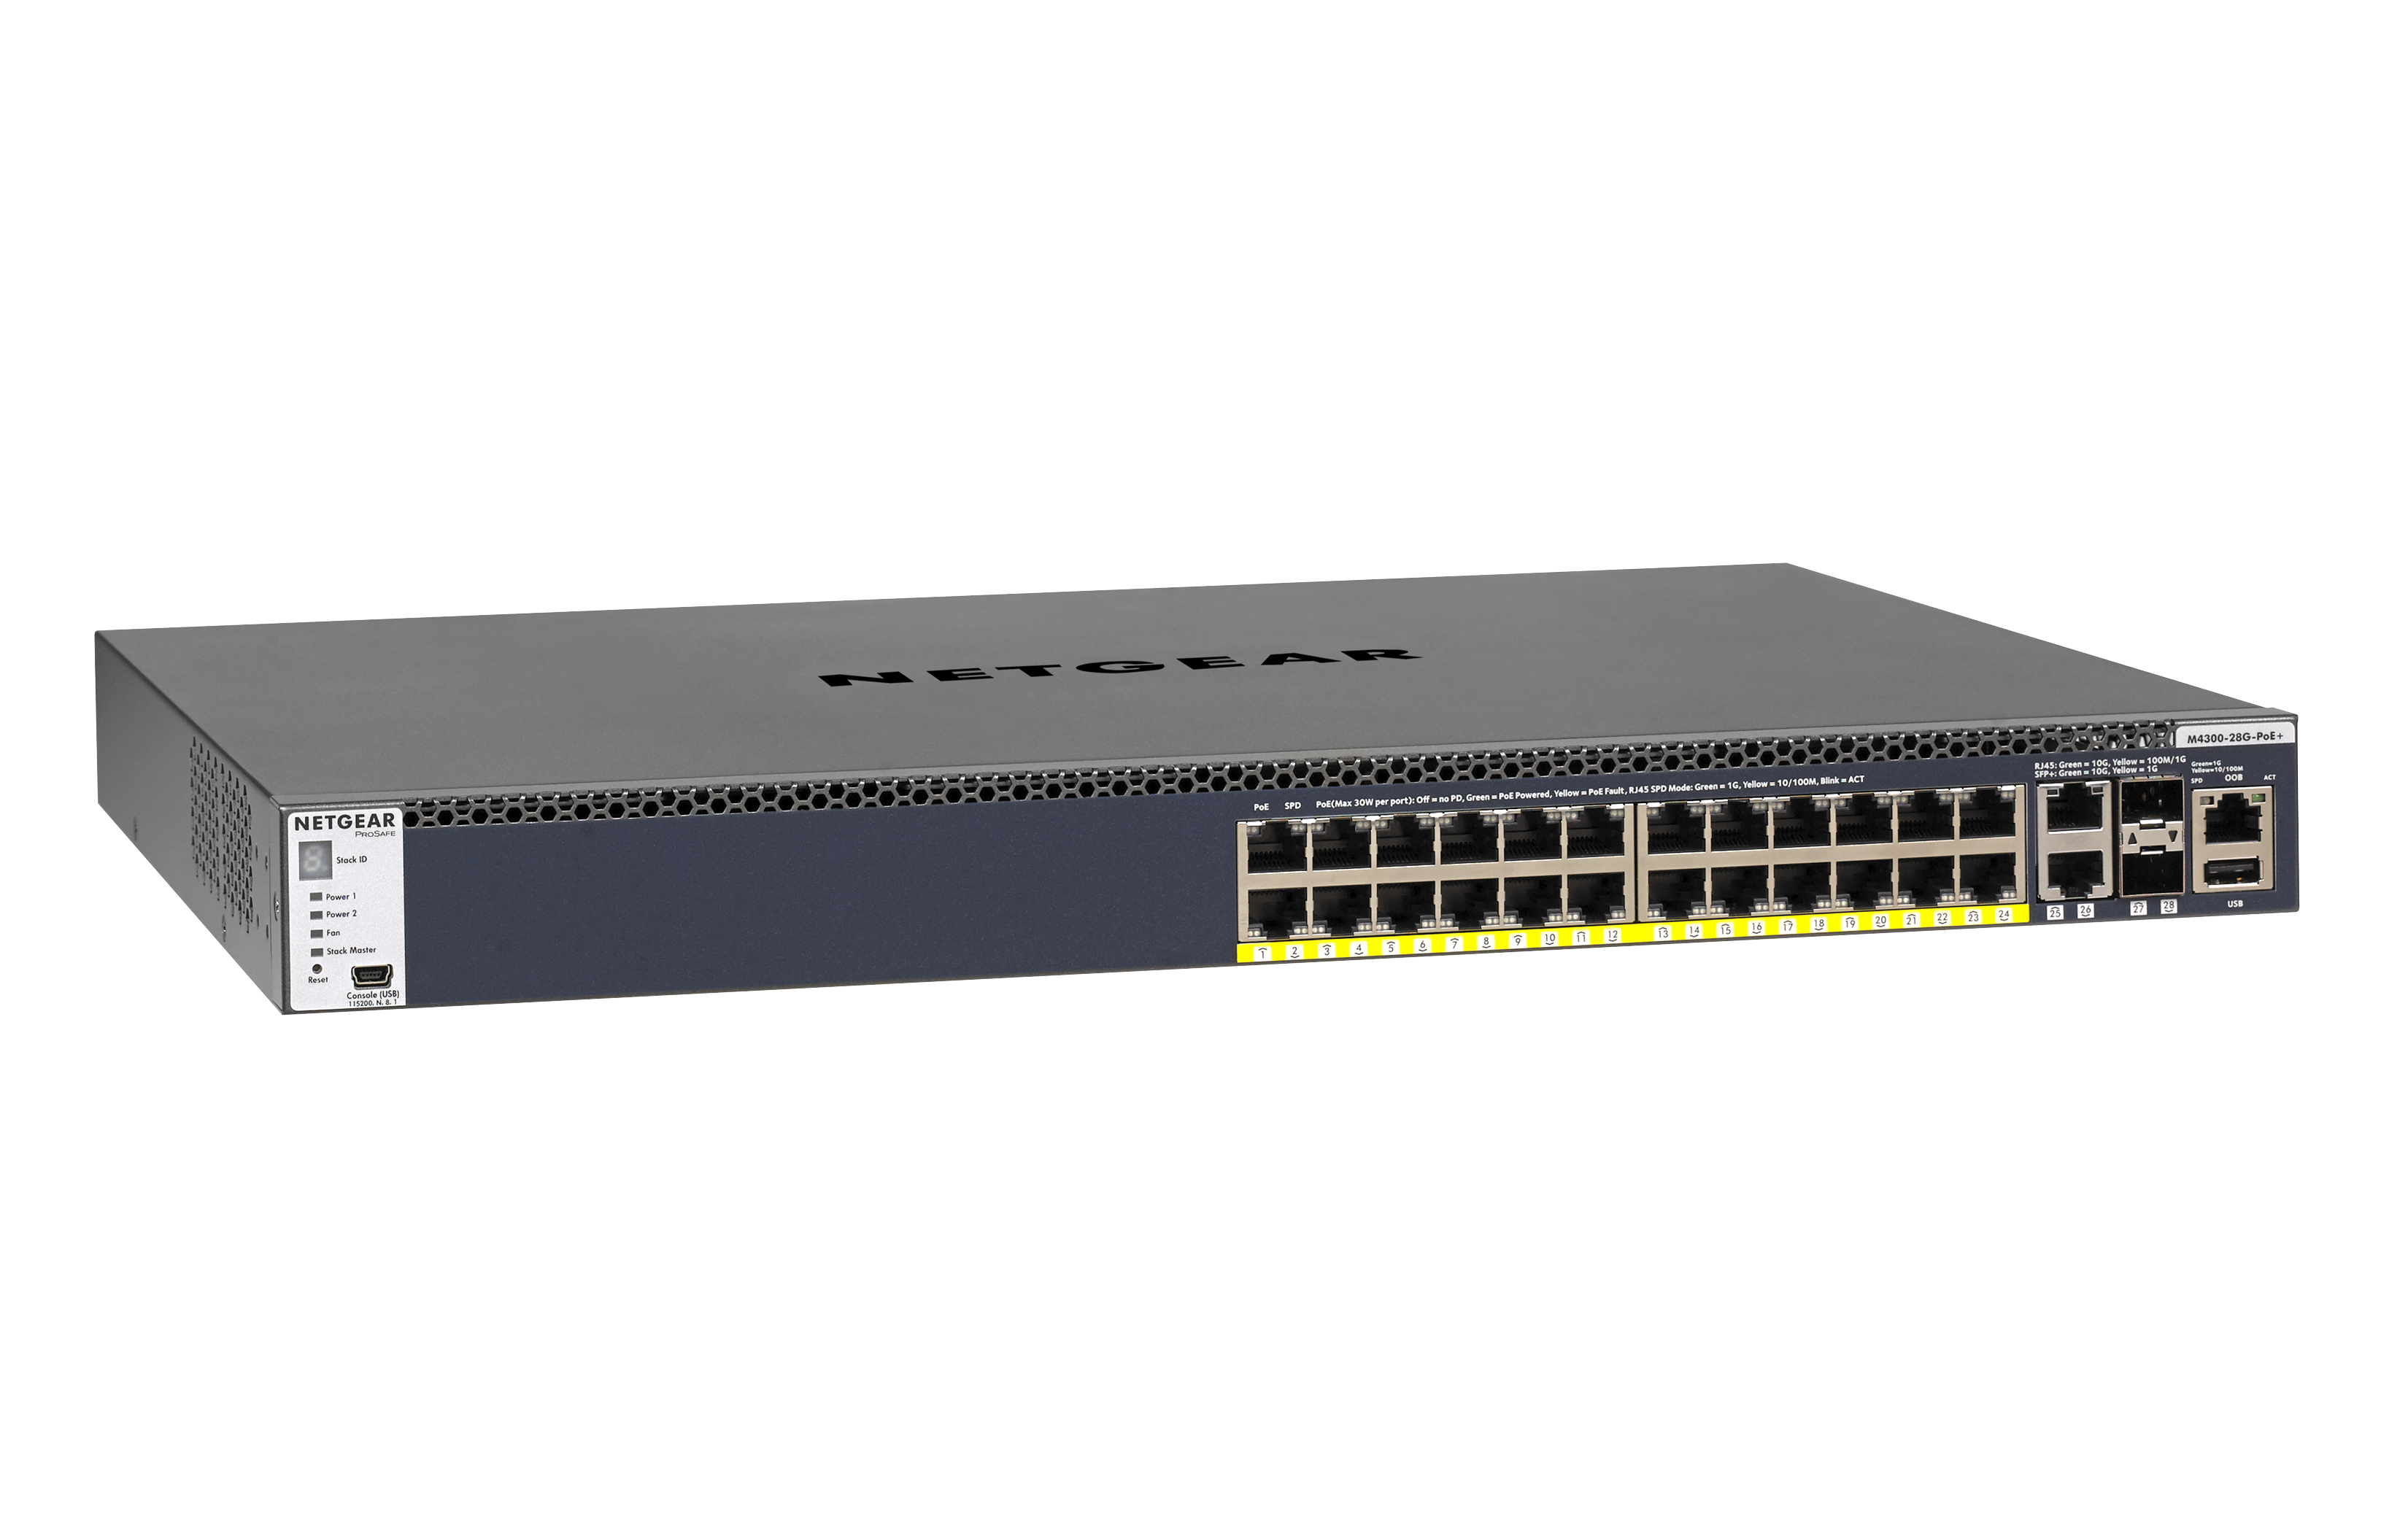 NETGEAR M4300-28G-PoE+ (1,000W PSU) Stackable Managed Switch (GSM4328PB) (GSM4328PB-100NES 606449112801 Networking Equipment Switches Gigabit Switches) photo